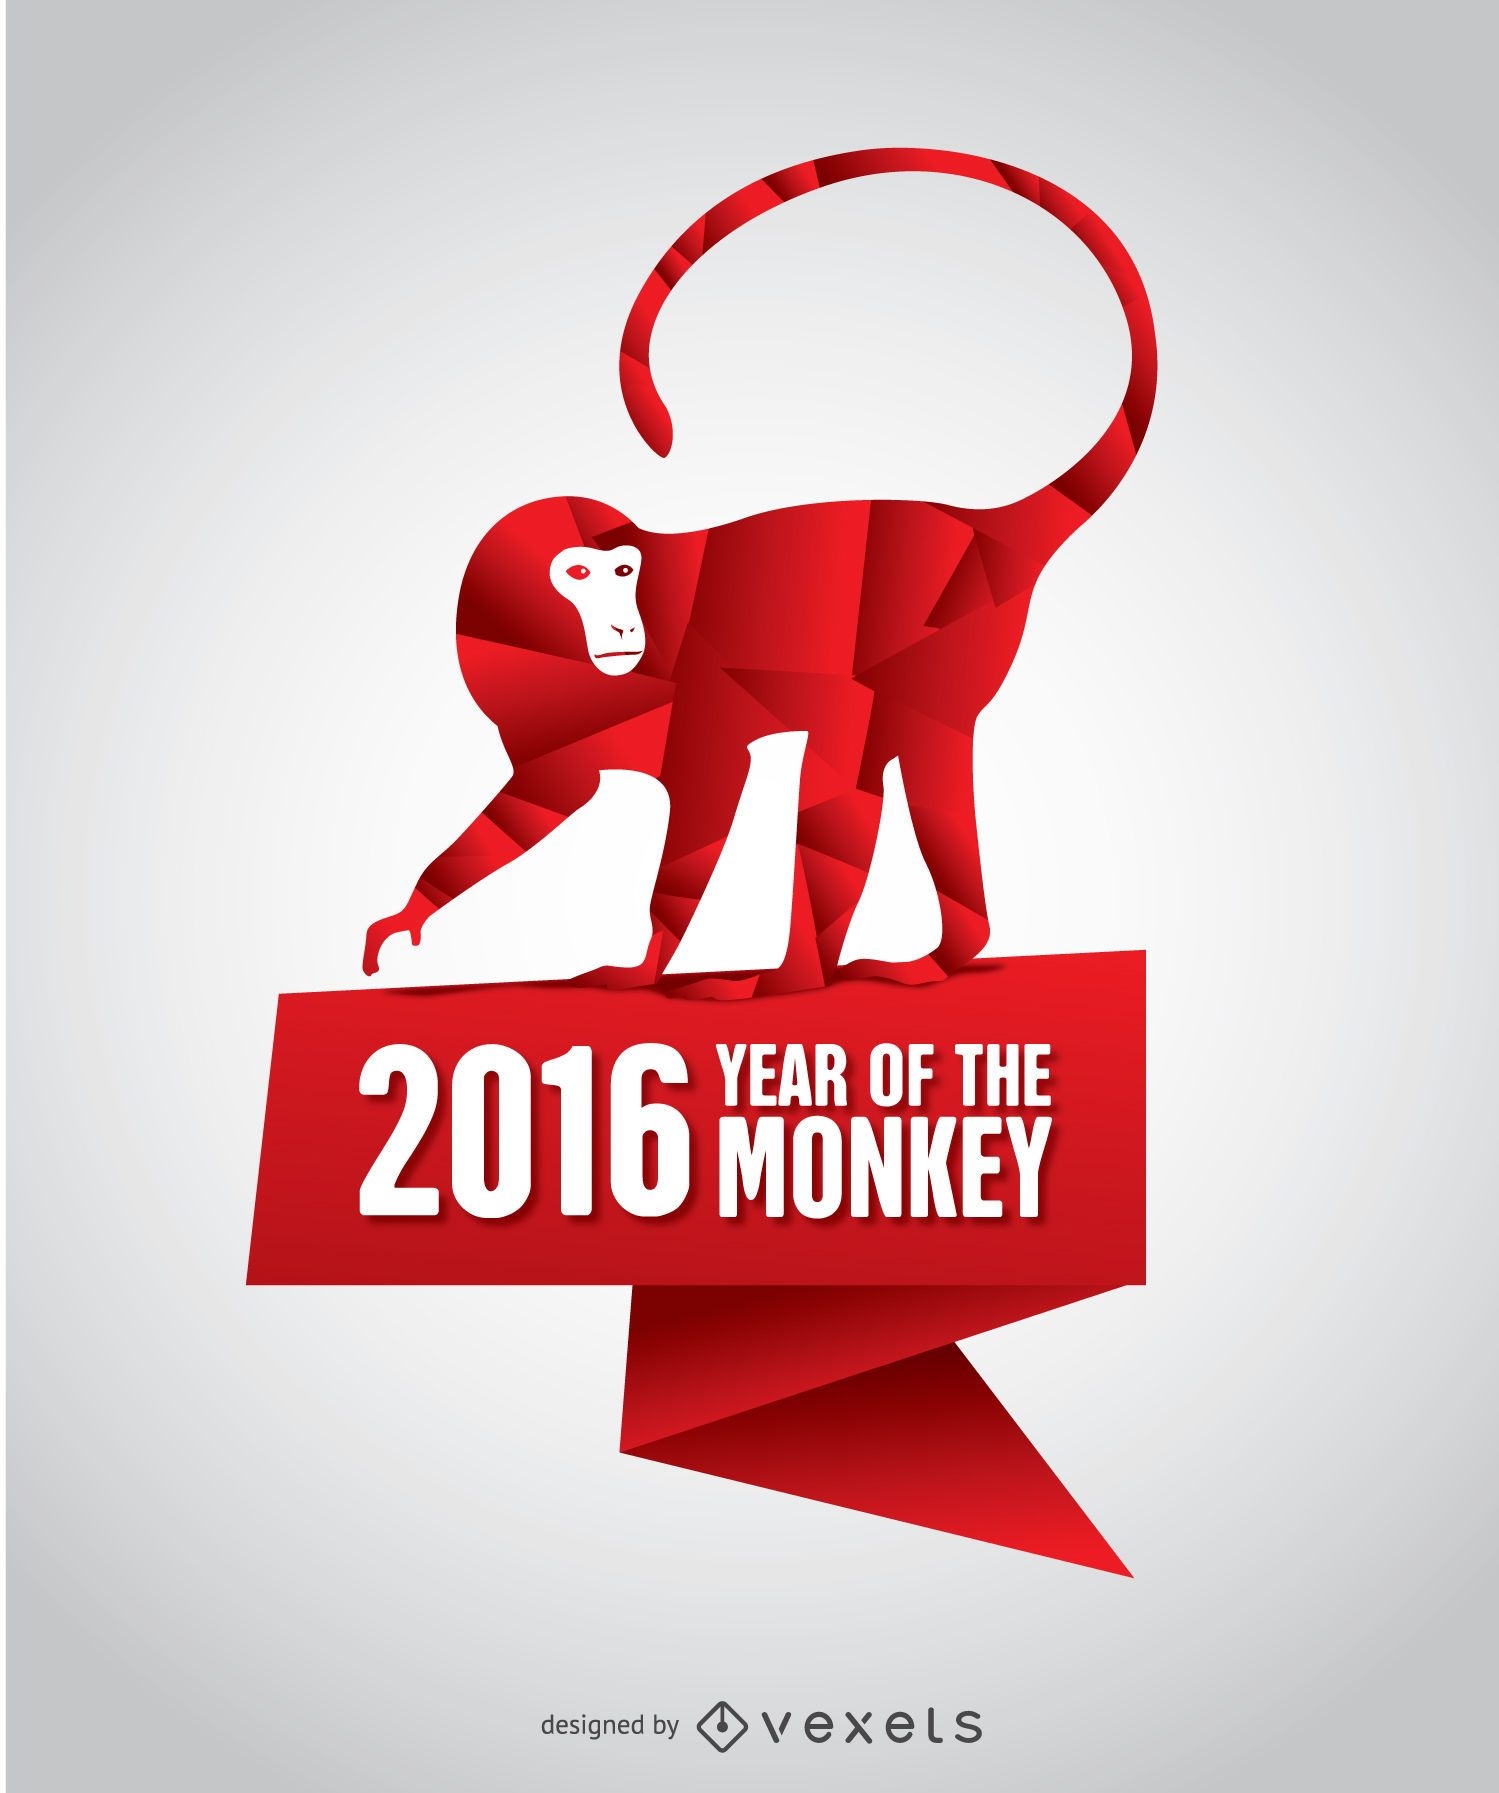 2016 Year of the Monkey poster